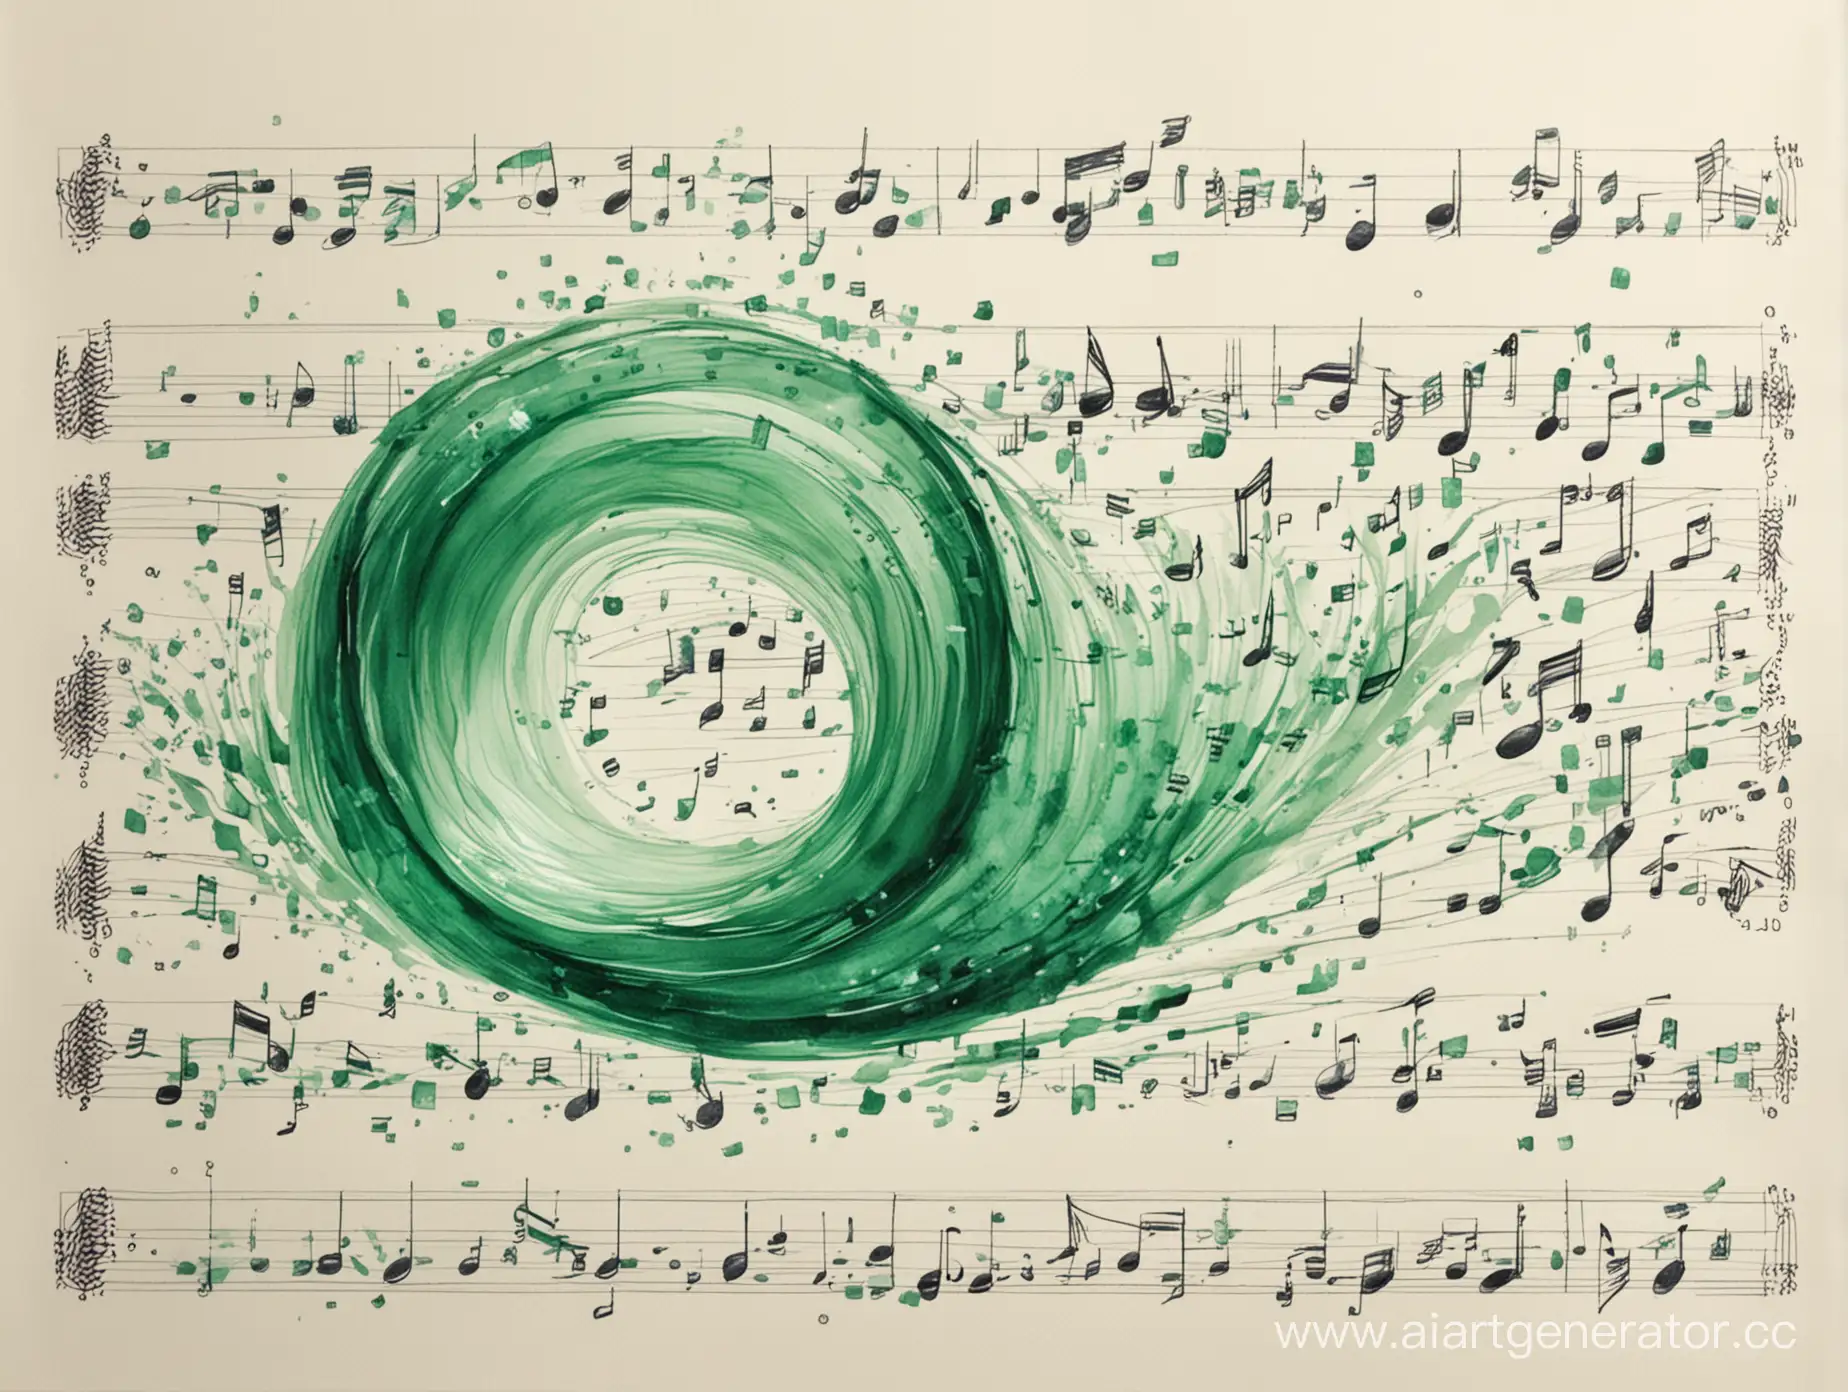 Soothing-Emerald-Waves-with-Floating-Musical-Notes